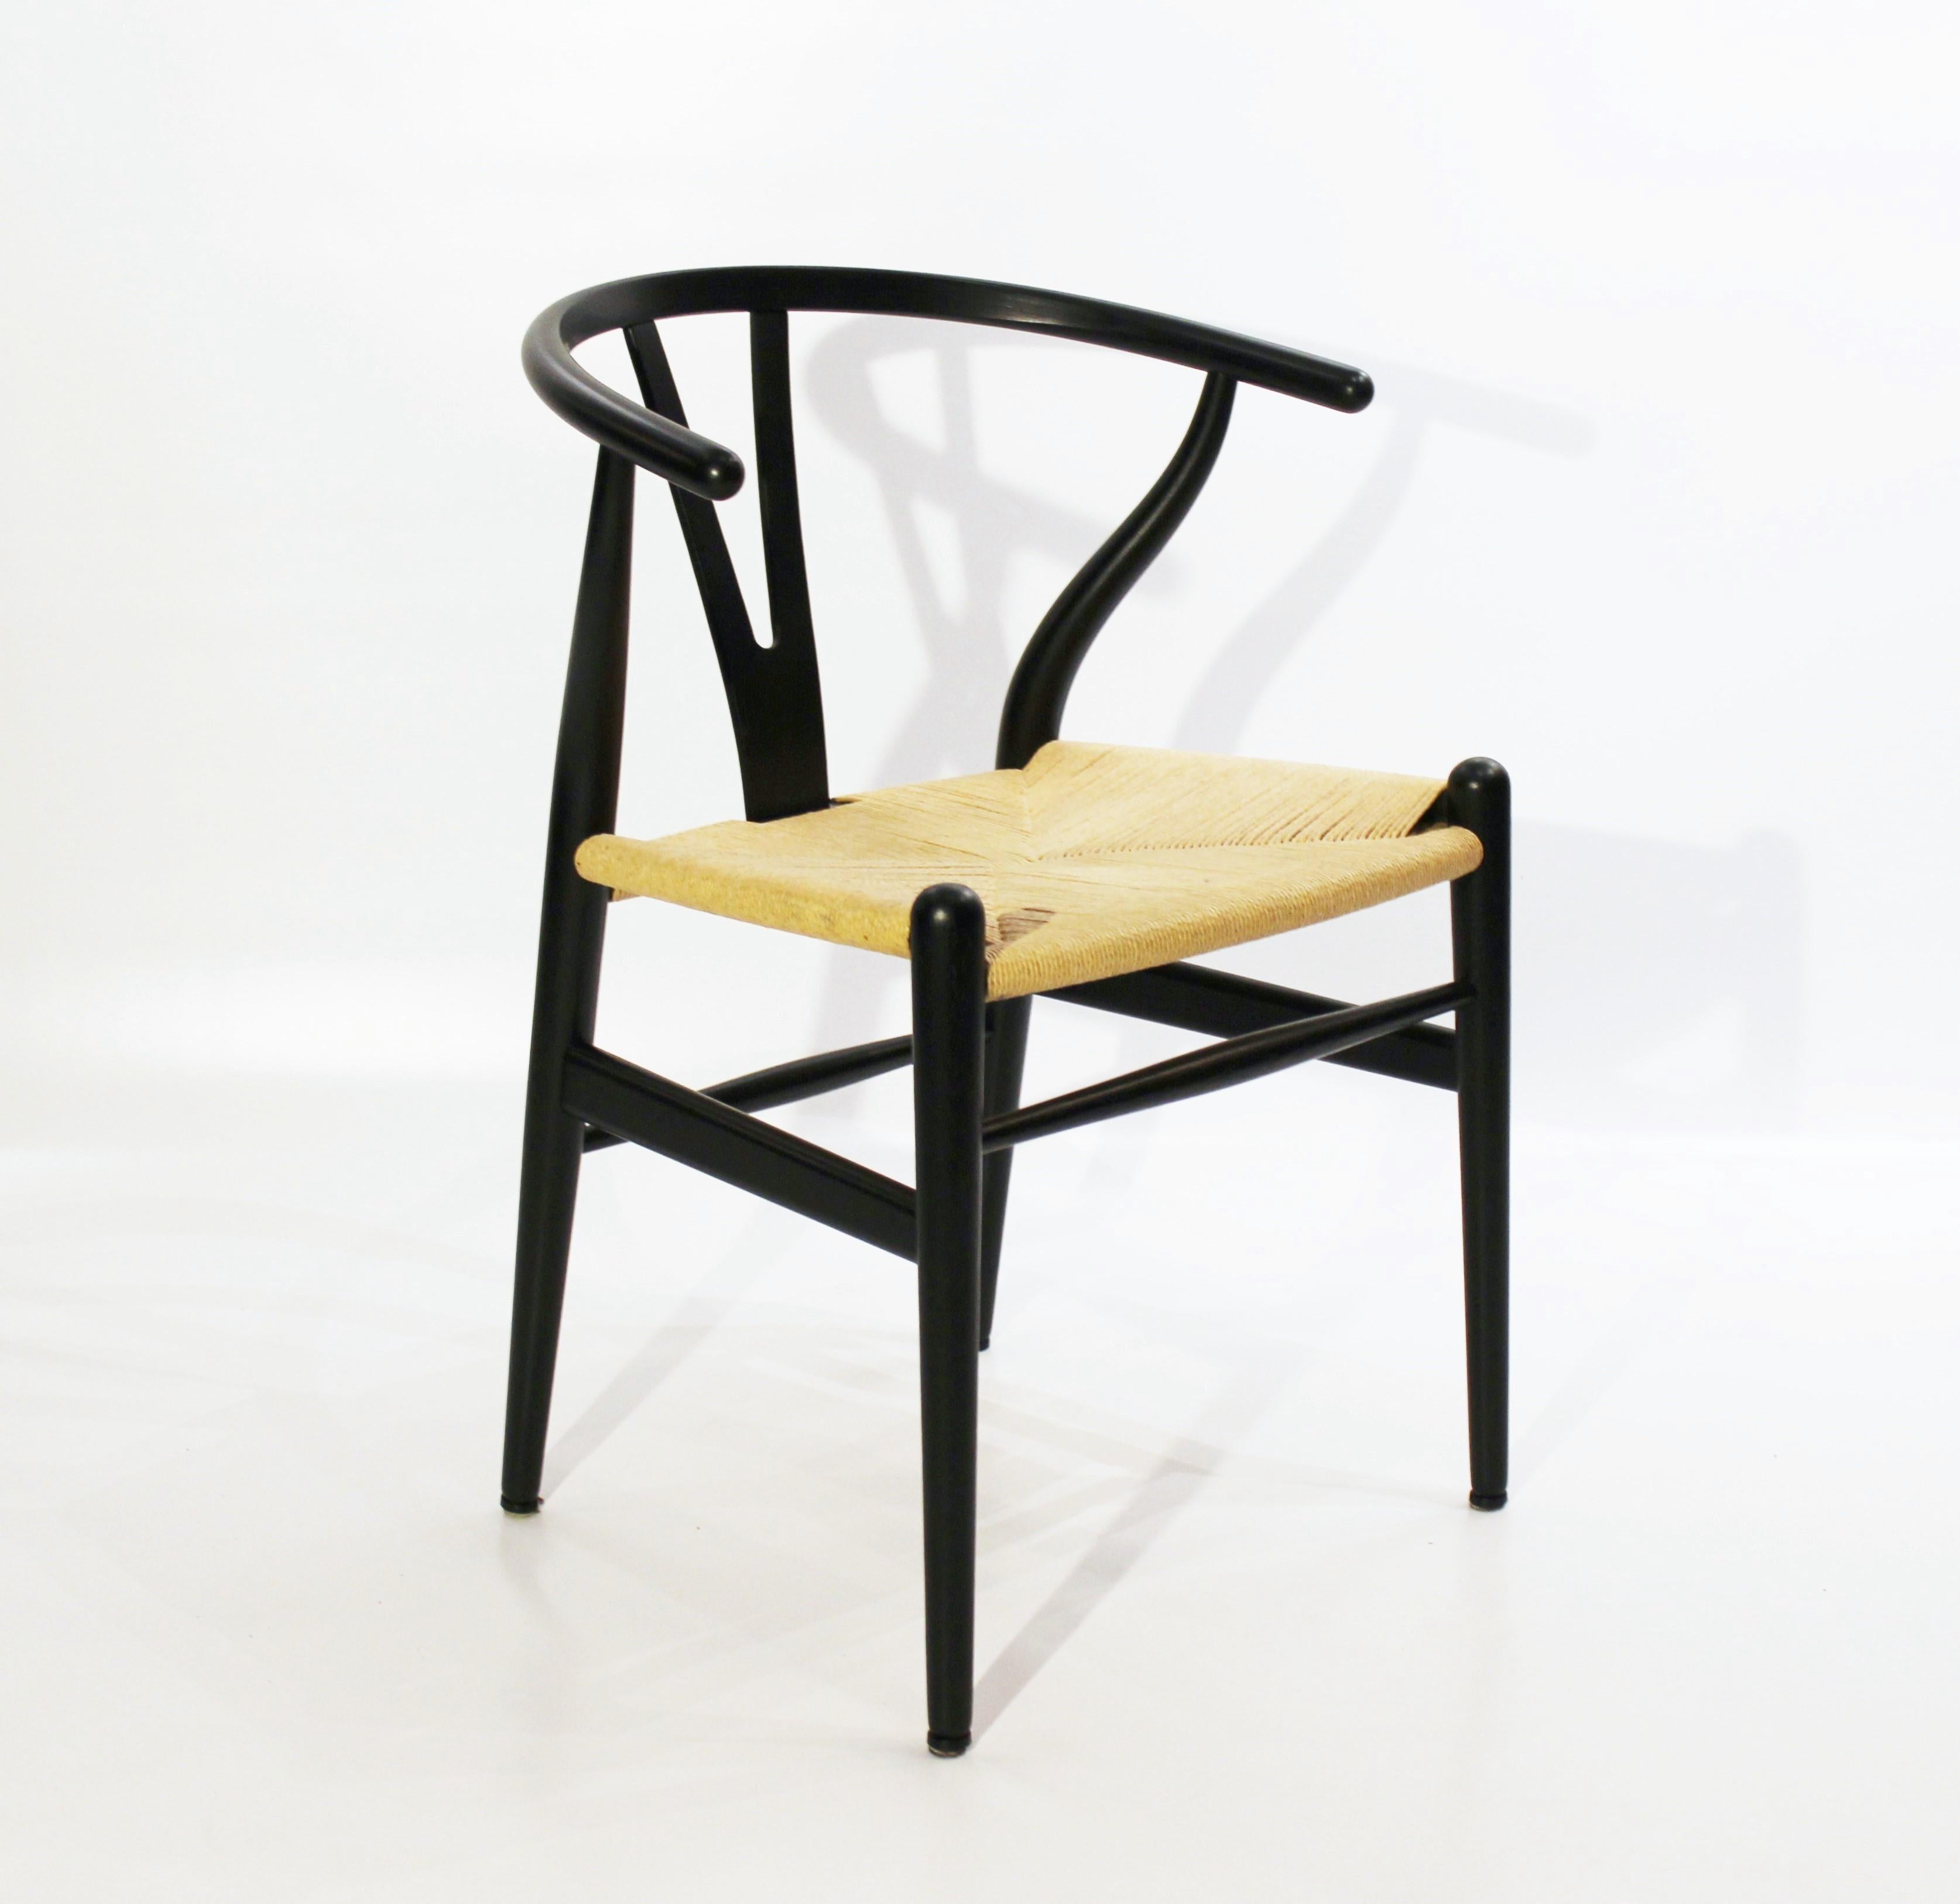 Set of three wishbone chairs, model CH24, of black painted wood and paper cord designed by Hans J. Wegner and manufactured by Carl Hansen & Son. The chairs are in great vintage condition.